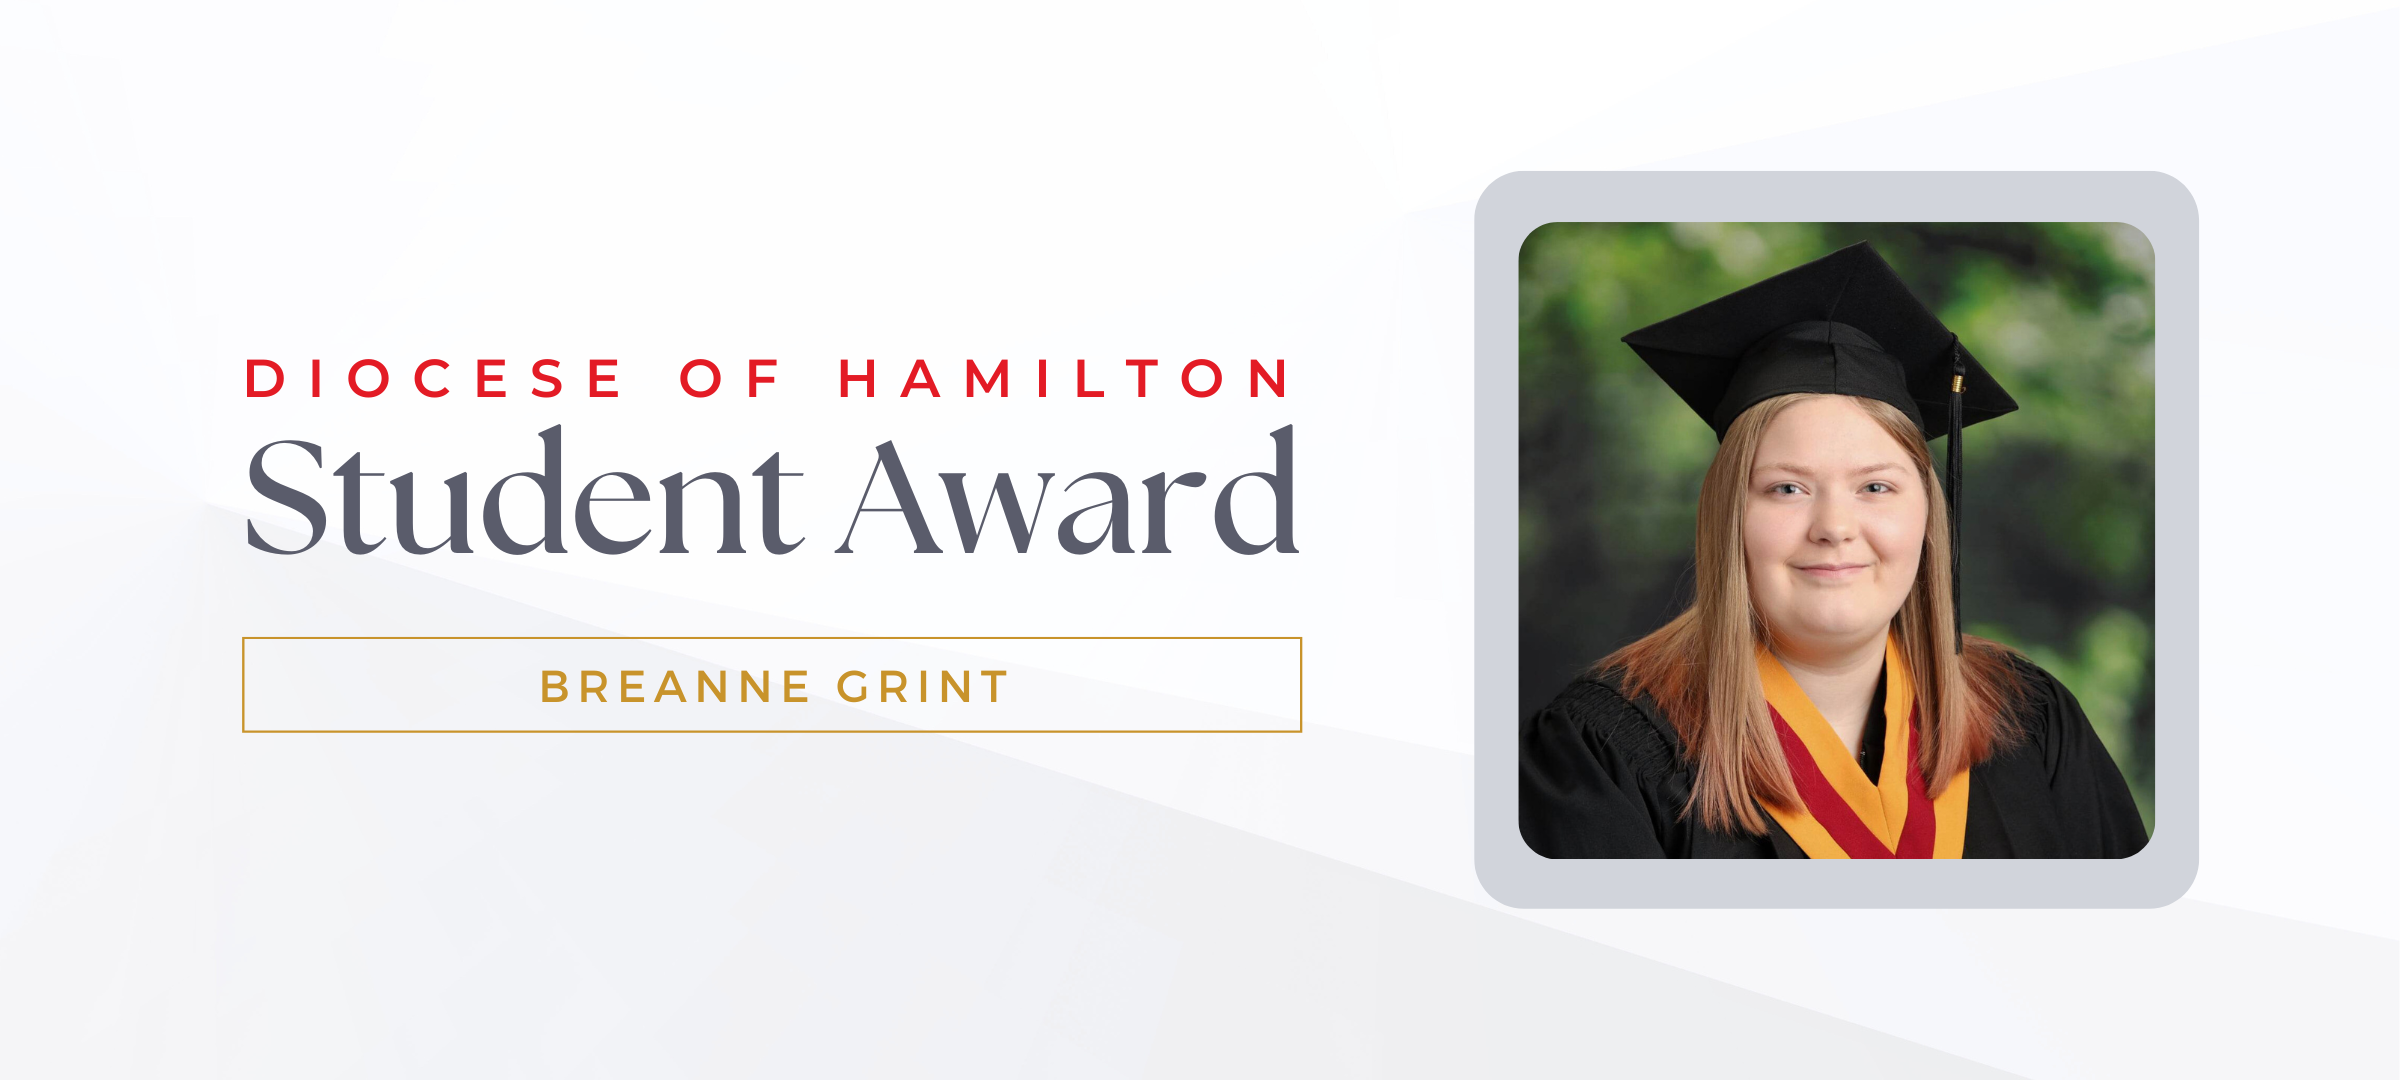 Diocese of Hamilton Student Award: Breanne Grint